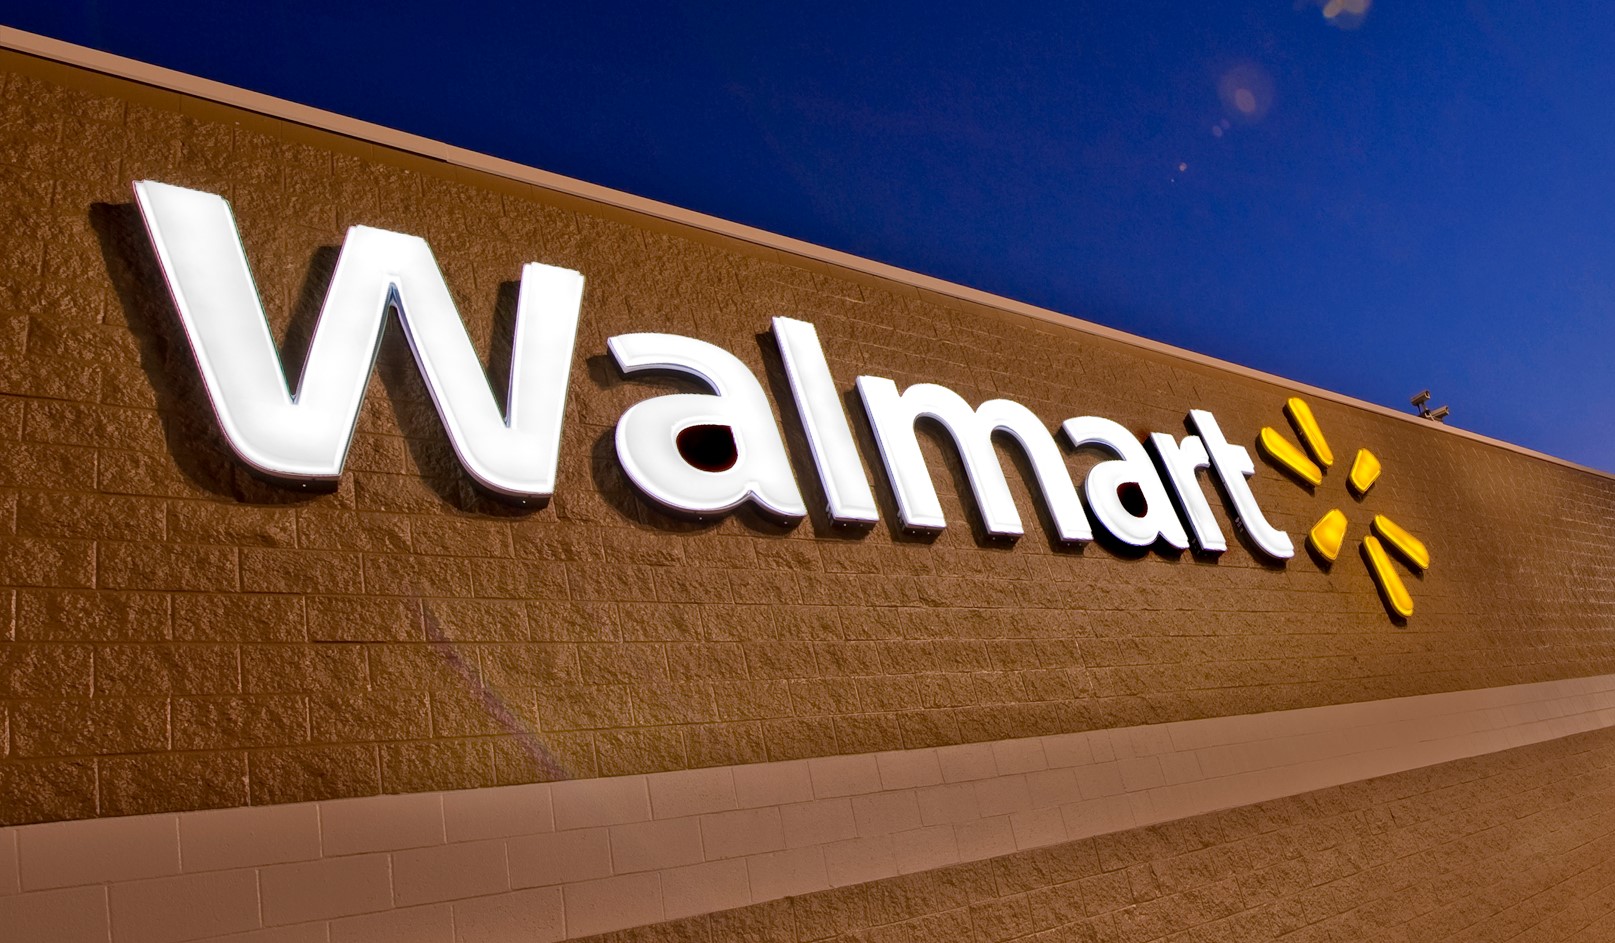 Walmarts To Close, Can This Help With Housing?